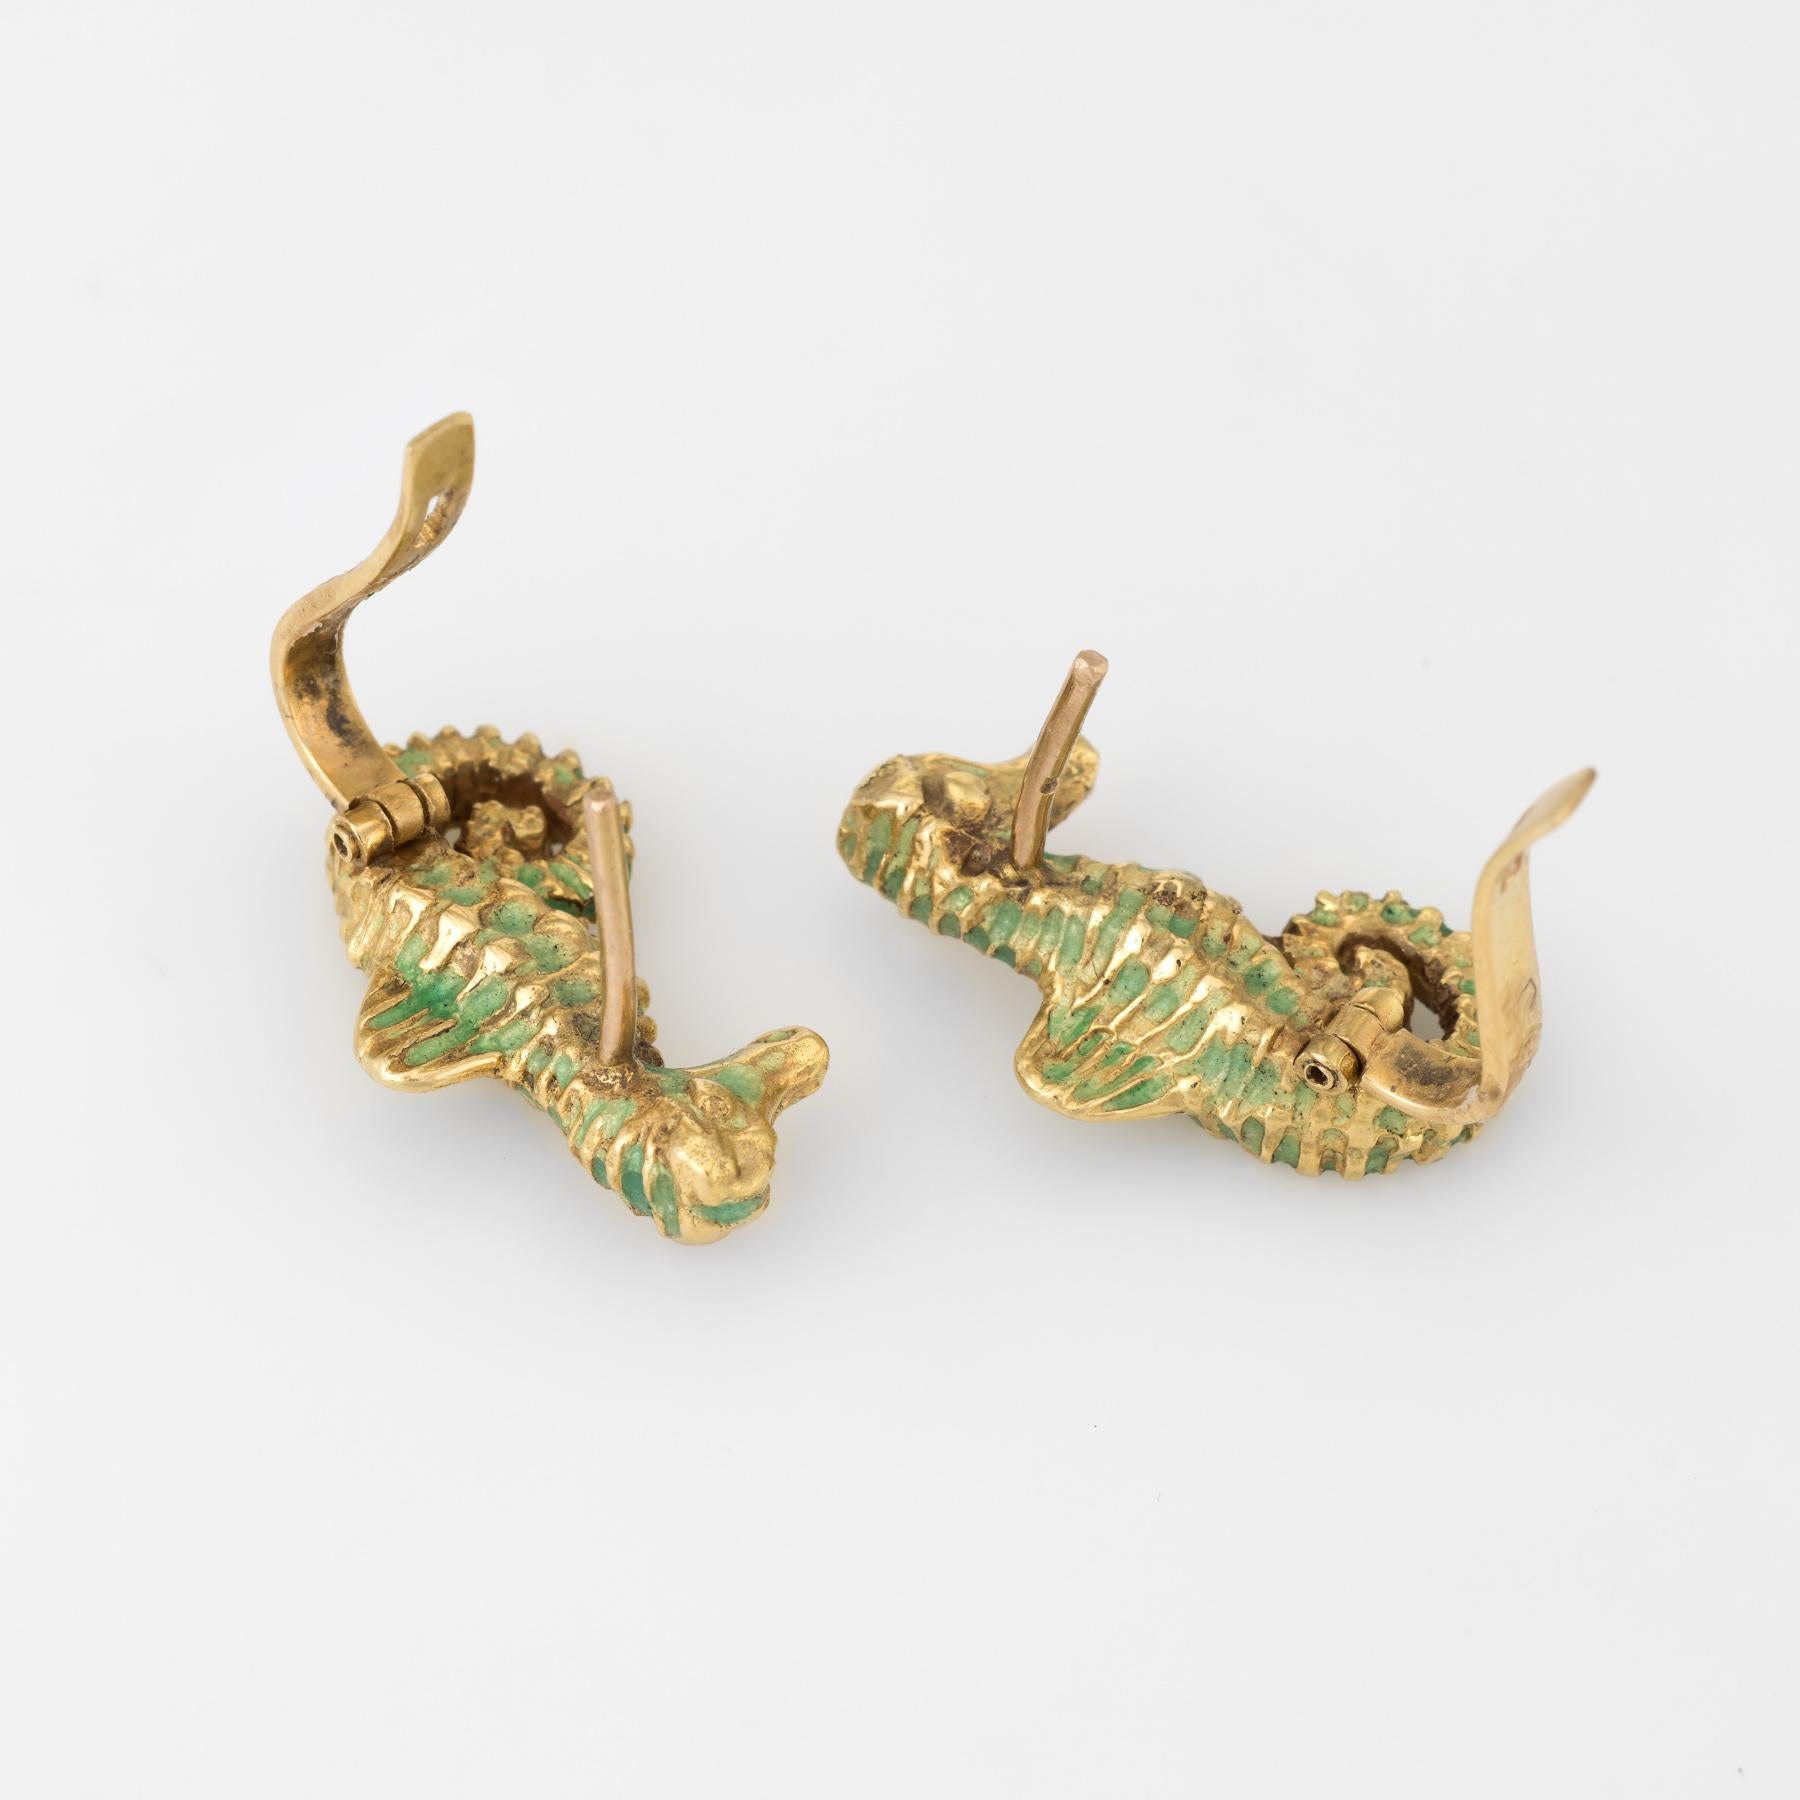 Finely detailed pair of seahorse earrings, crafted in 18k yellow gold. 

Two old mine cut diamonds are embedded into the eyes and total an estimated 0.04 carats (estimated at I color and SI2 clarity). 

Lifelike textured design overlaid with green